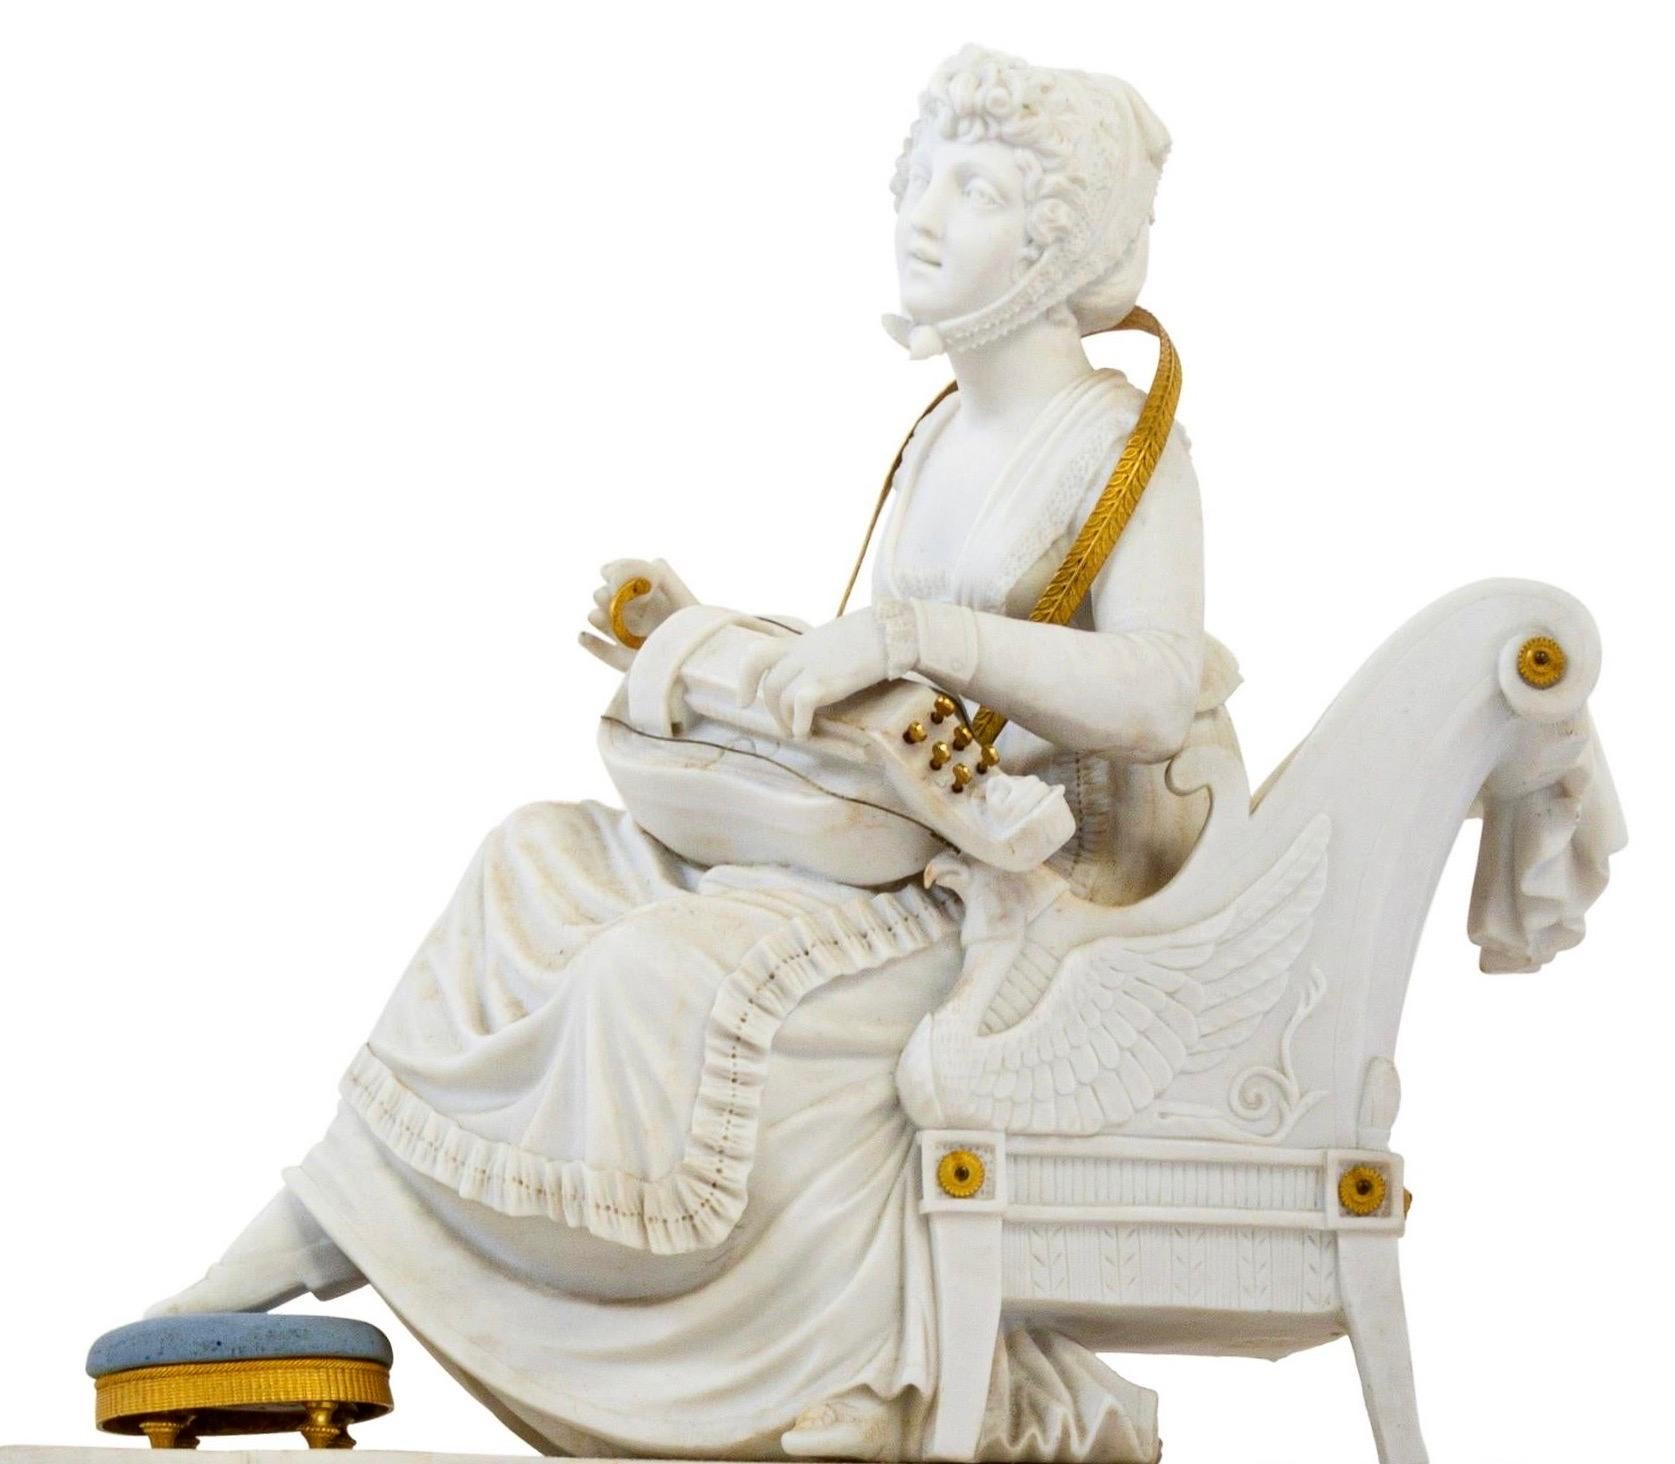 Period early 19th century Directoire clock attributed to Sèvres. Beautifully sculpted biscuit porcelain in white and Wedgwood blue jasper ware color. Ormolu mounts. Of a seated lady in neoclassical attire, sitting in a griffin motif armchair playing